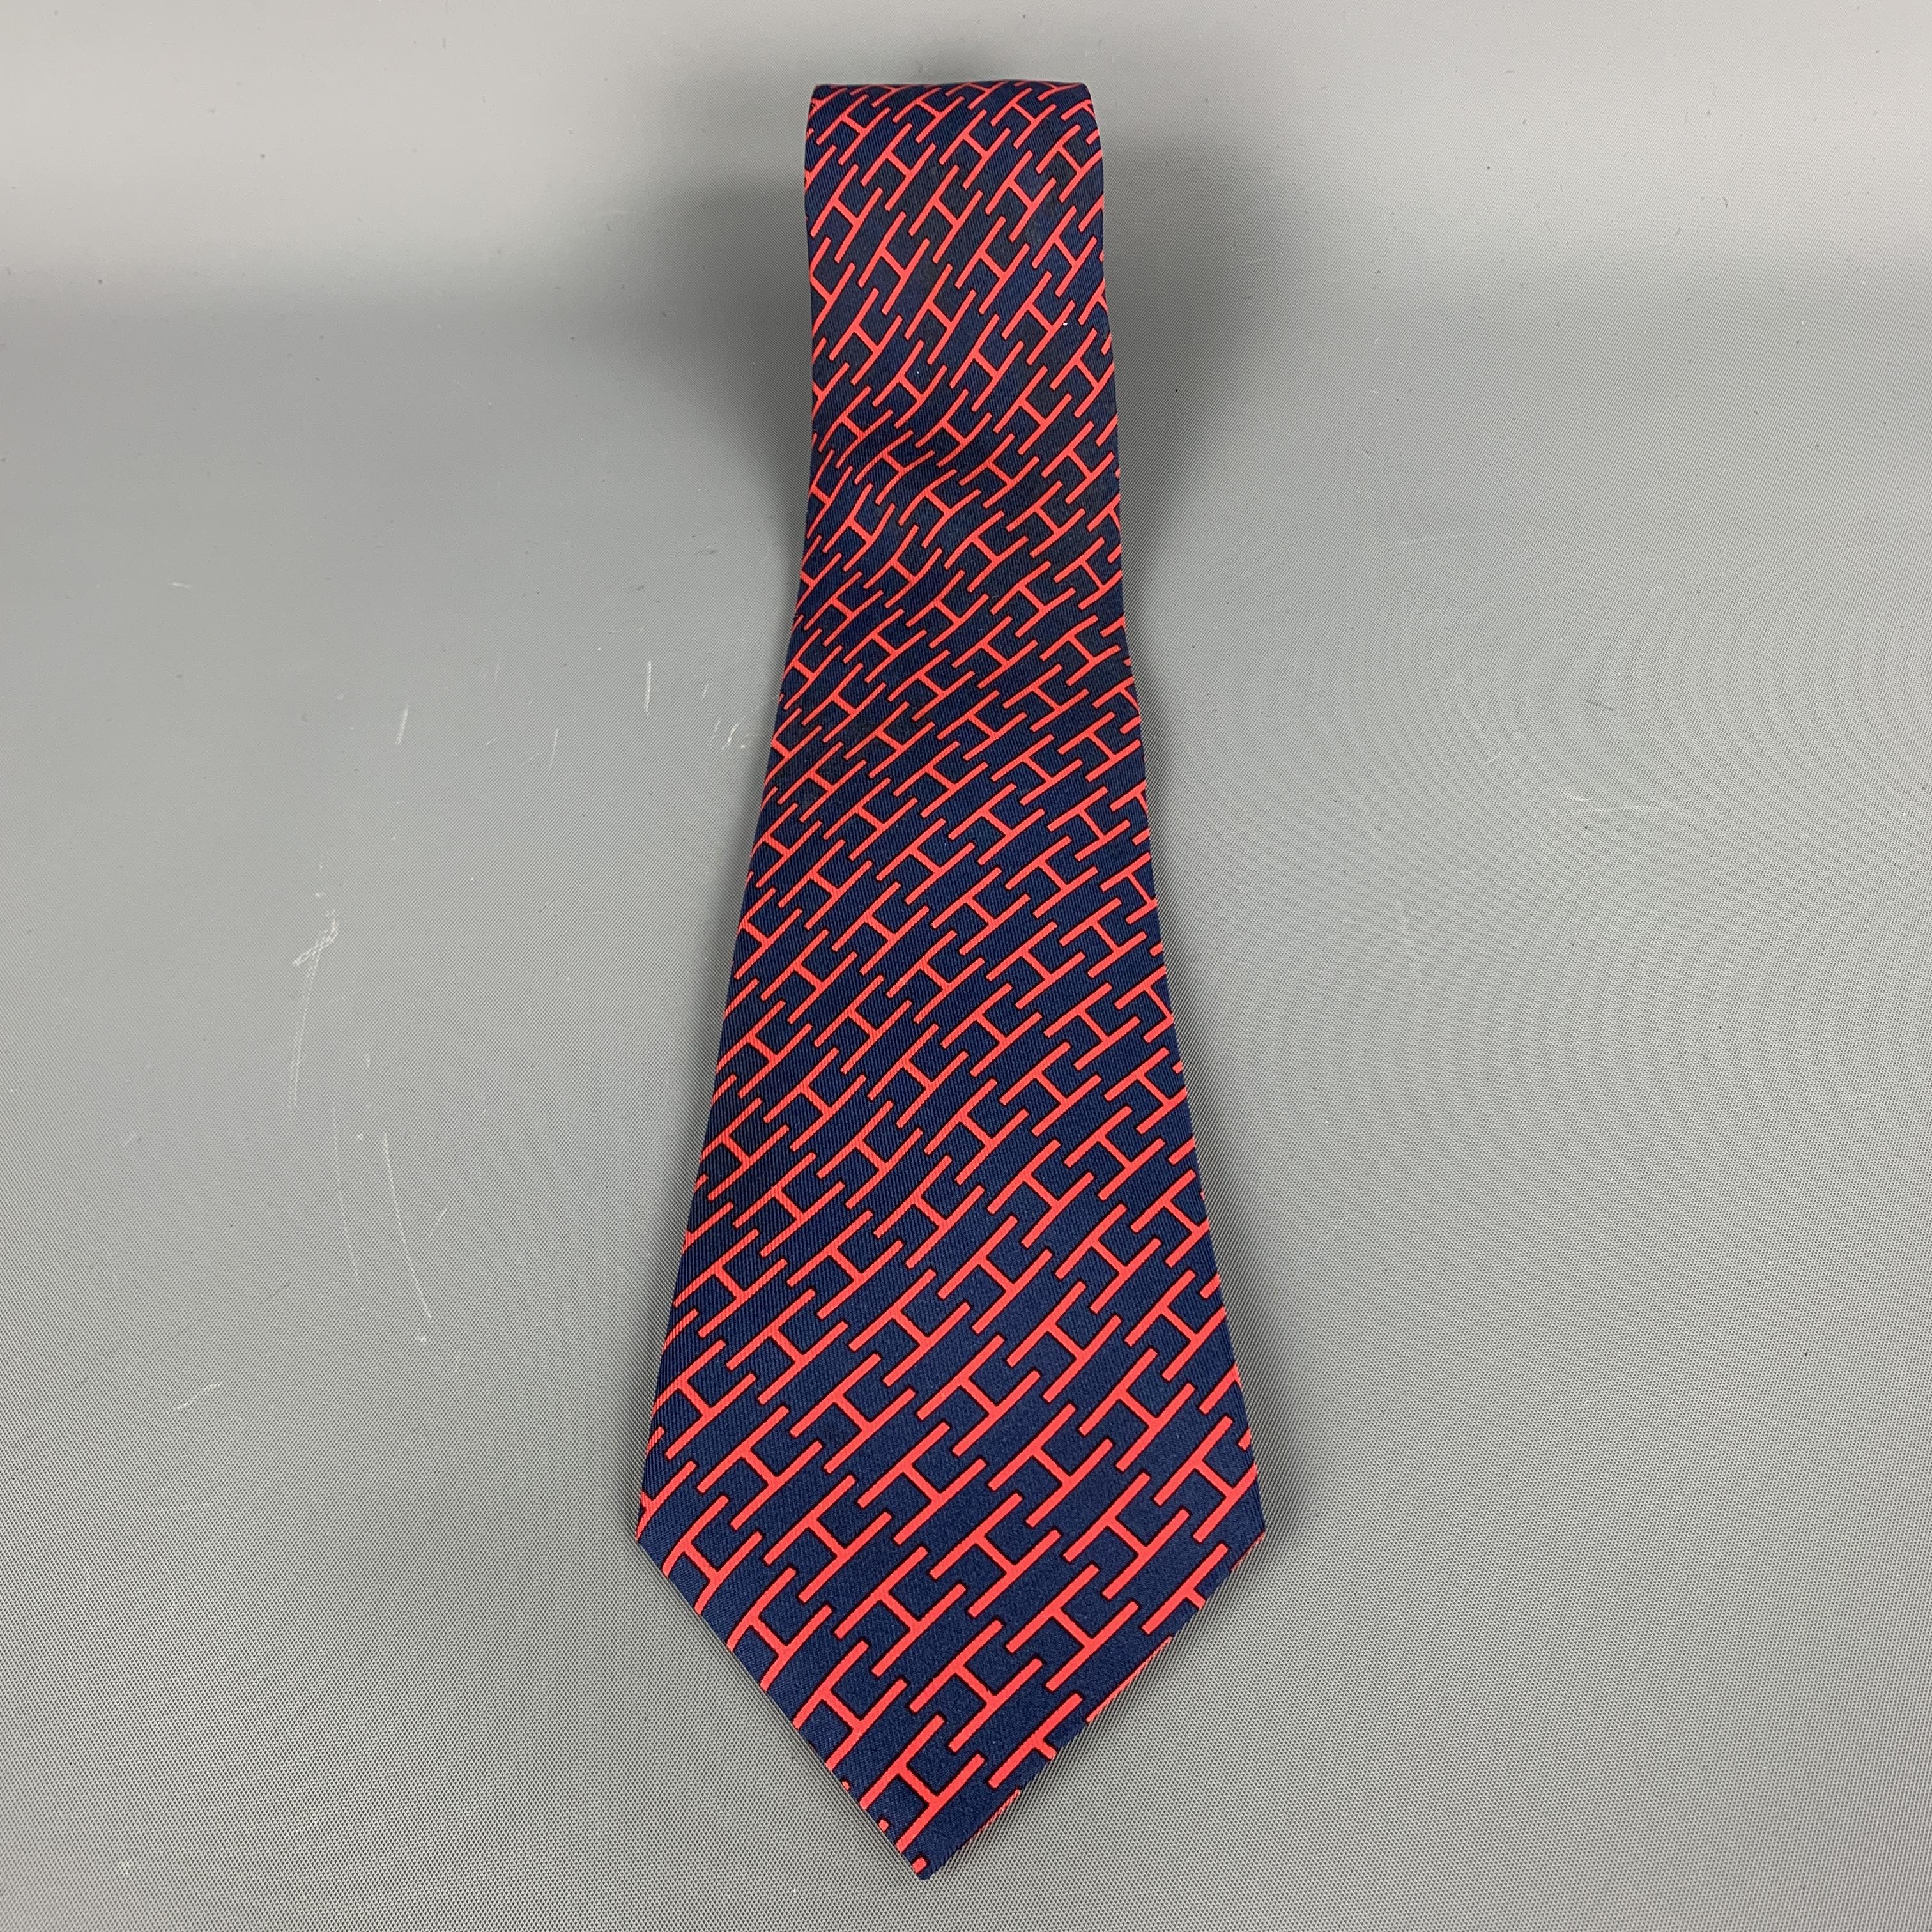 Vintage Hermes necktie comes in a navy and red silk twill with all over 